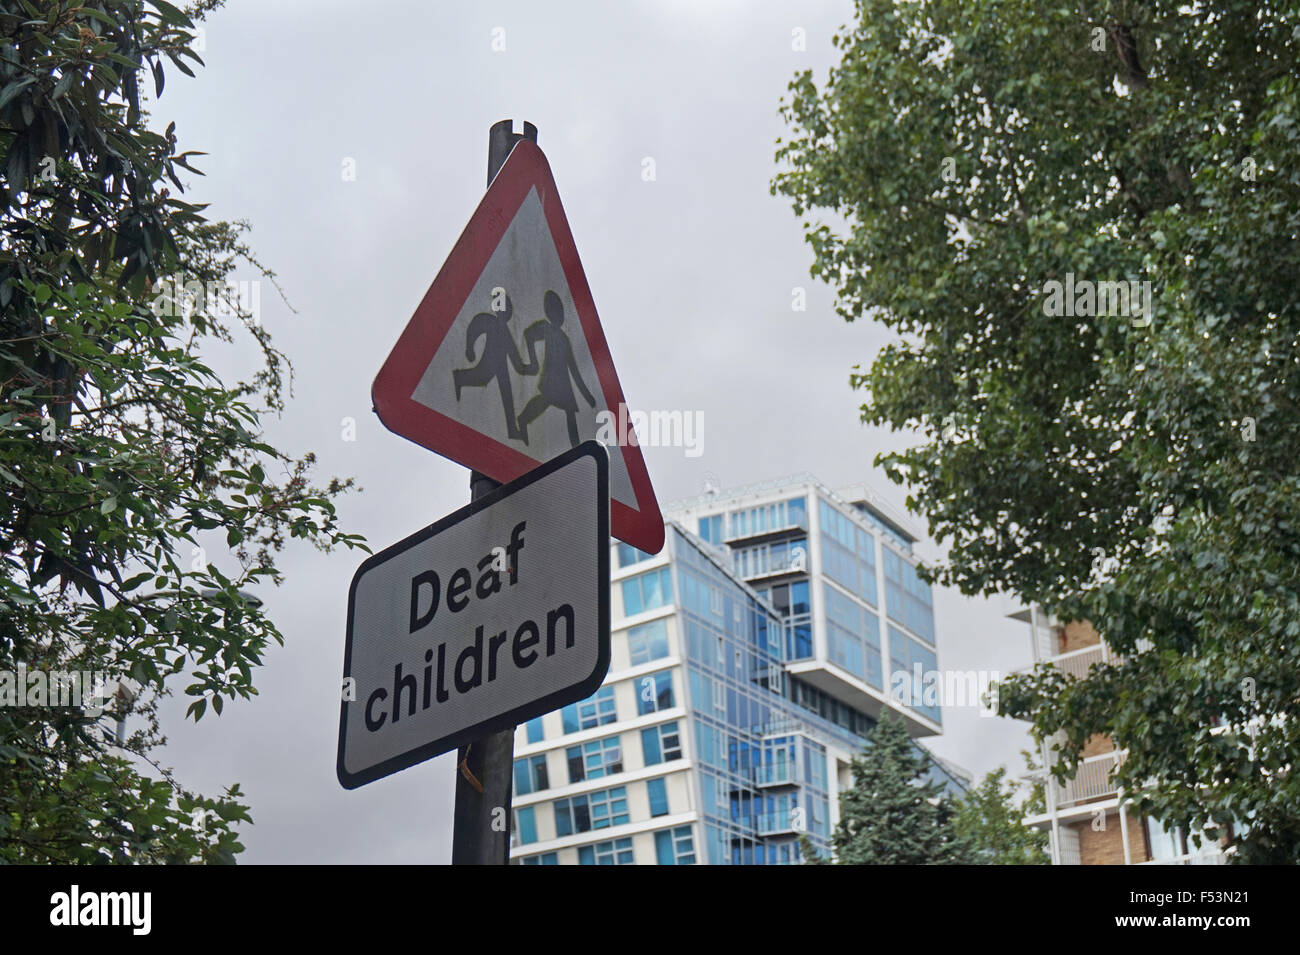 A sign showing a street crossing for Deaf Children, London, England Stock Photo